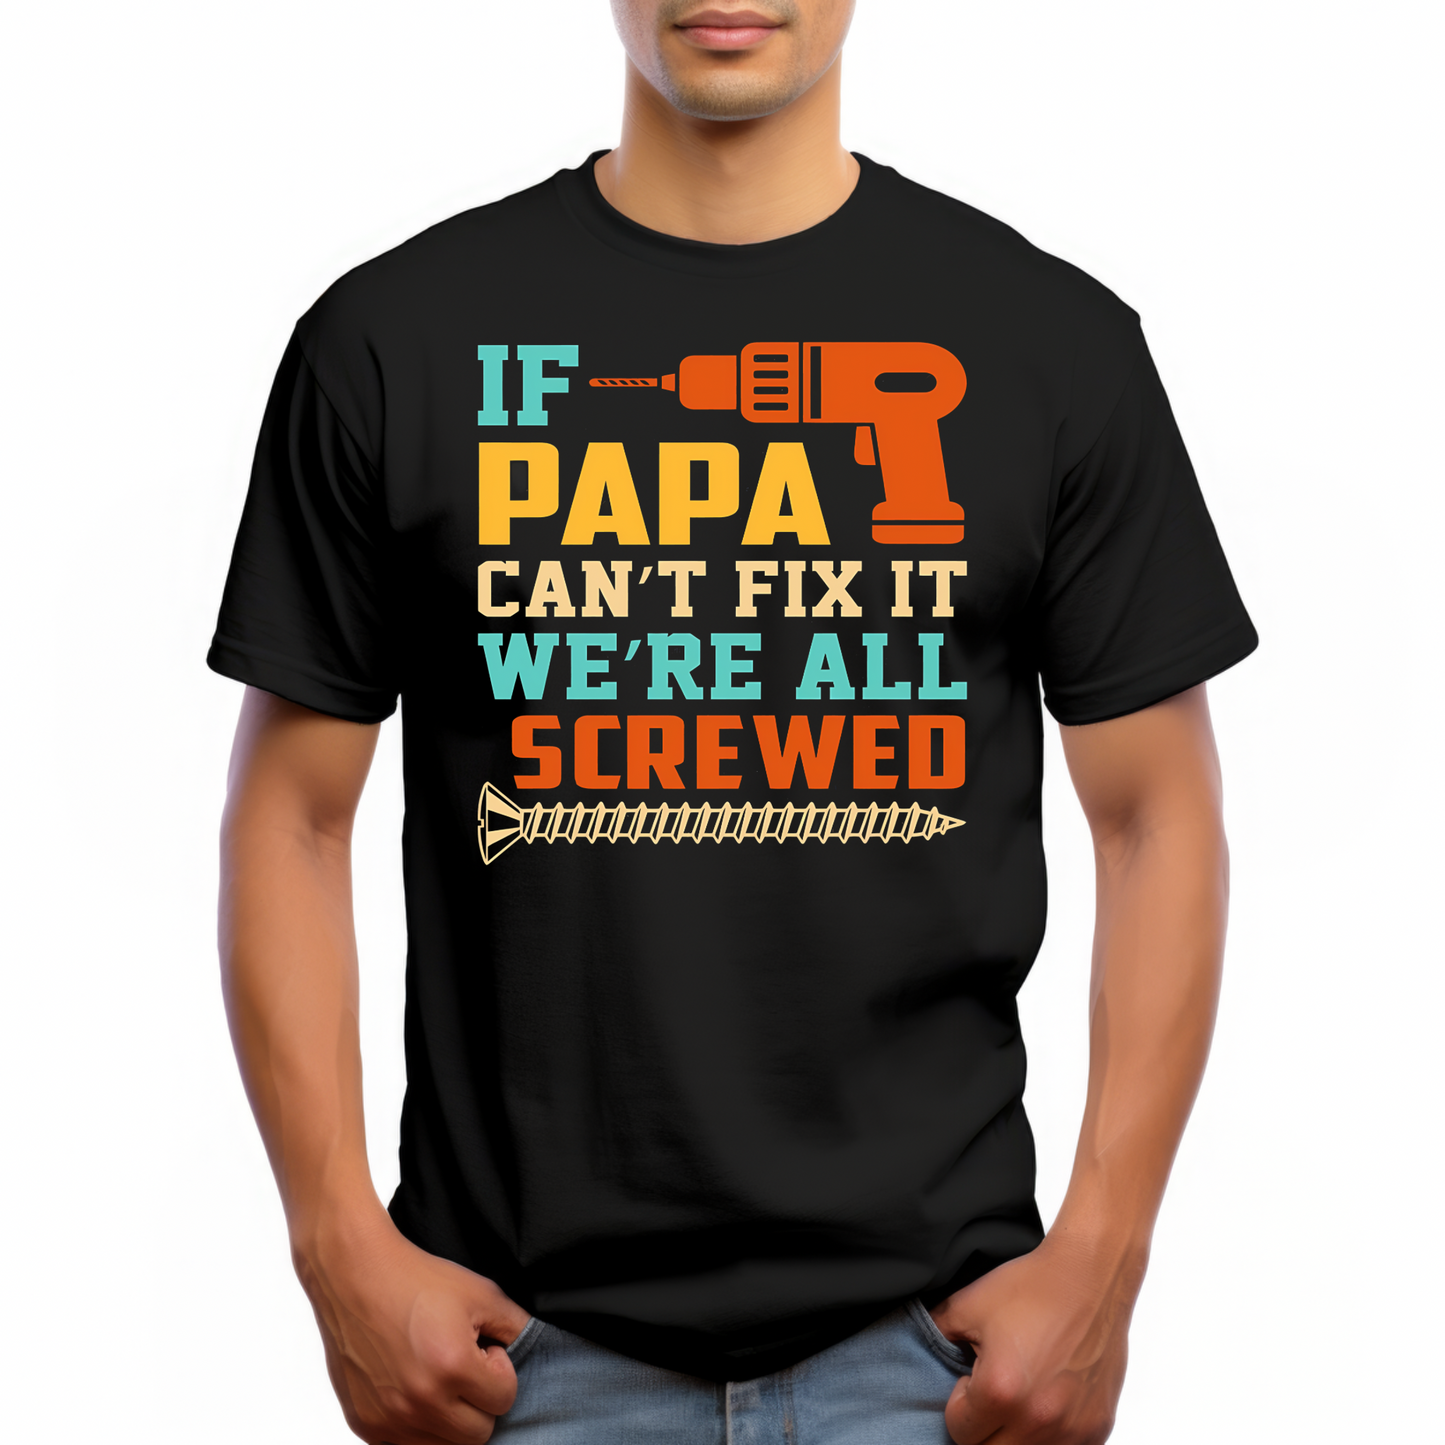 If papa can’t fix it we’re all screwed